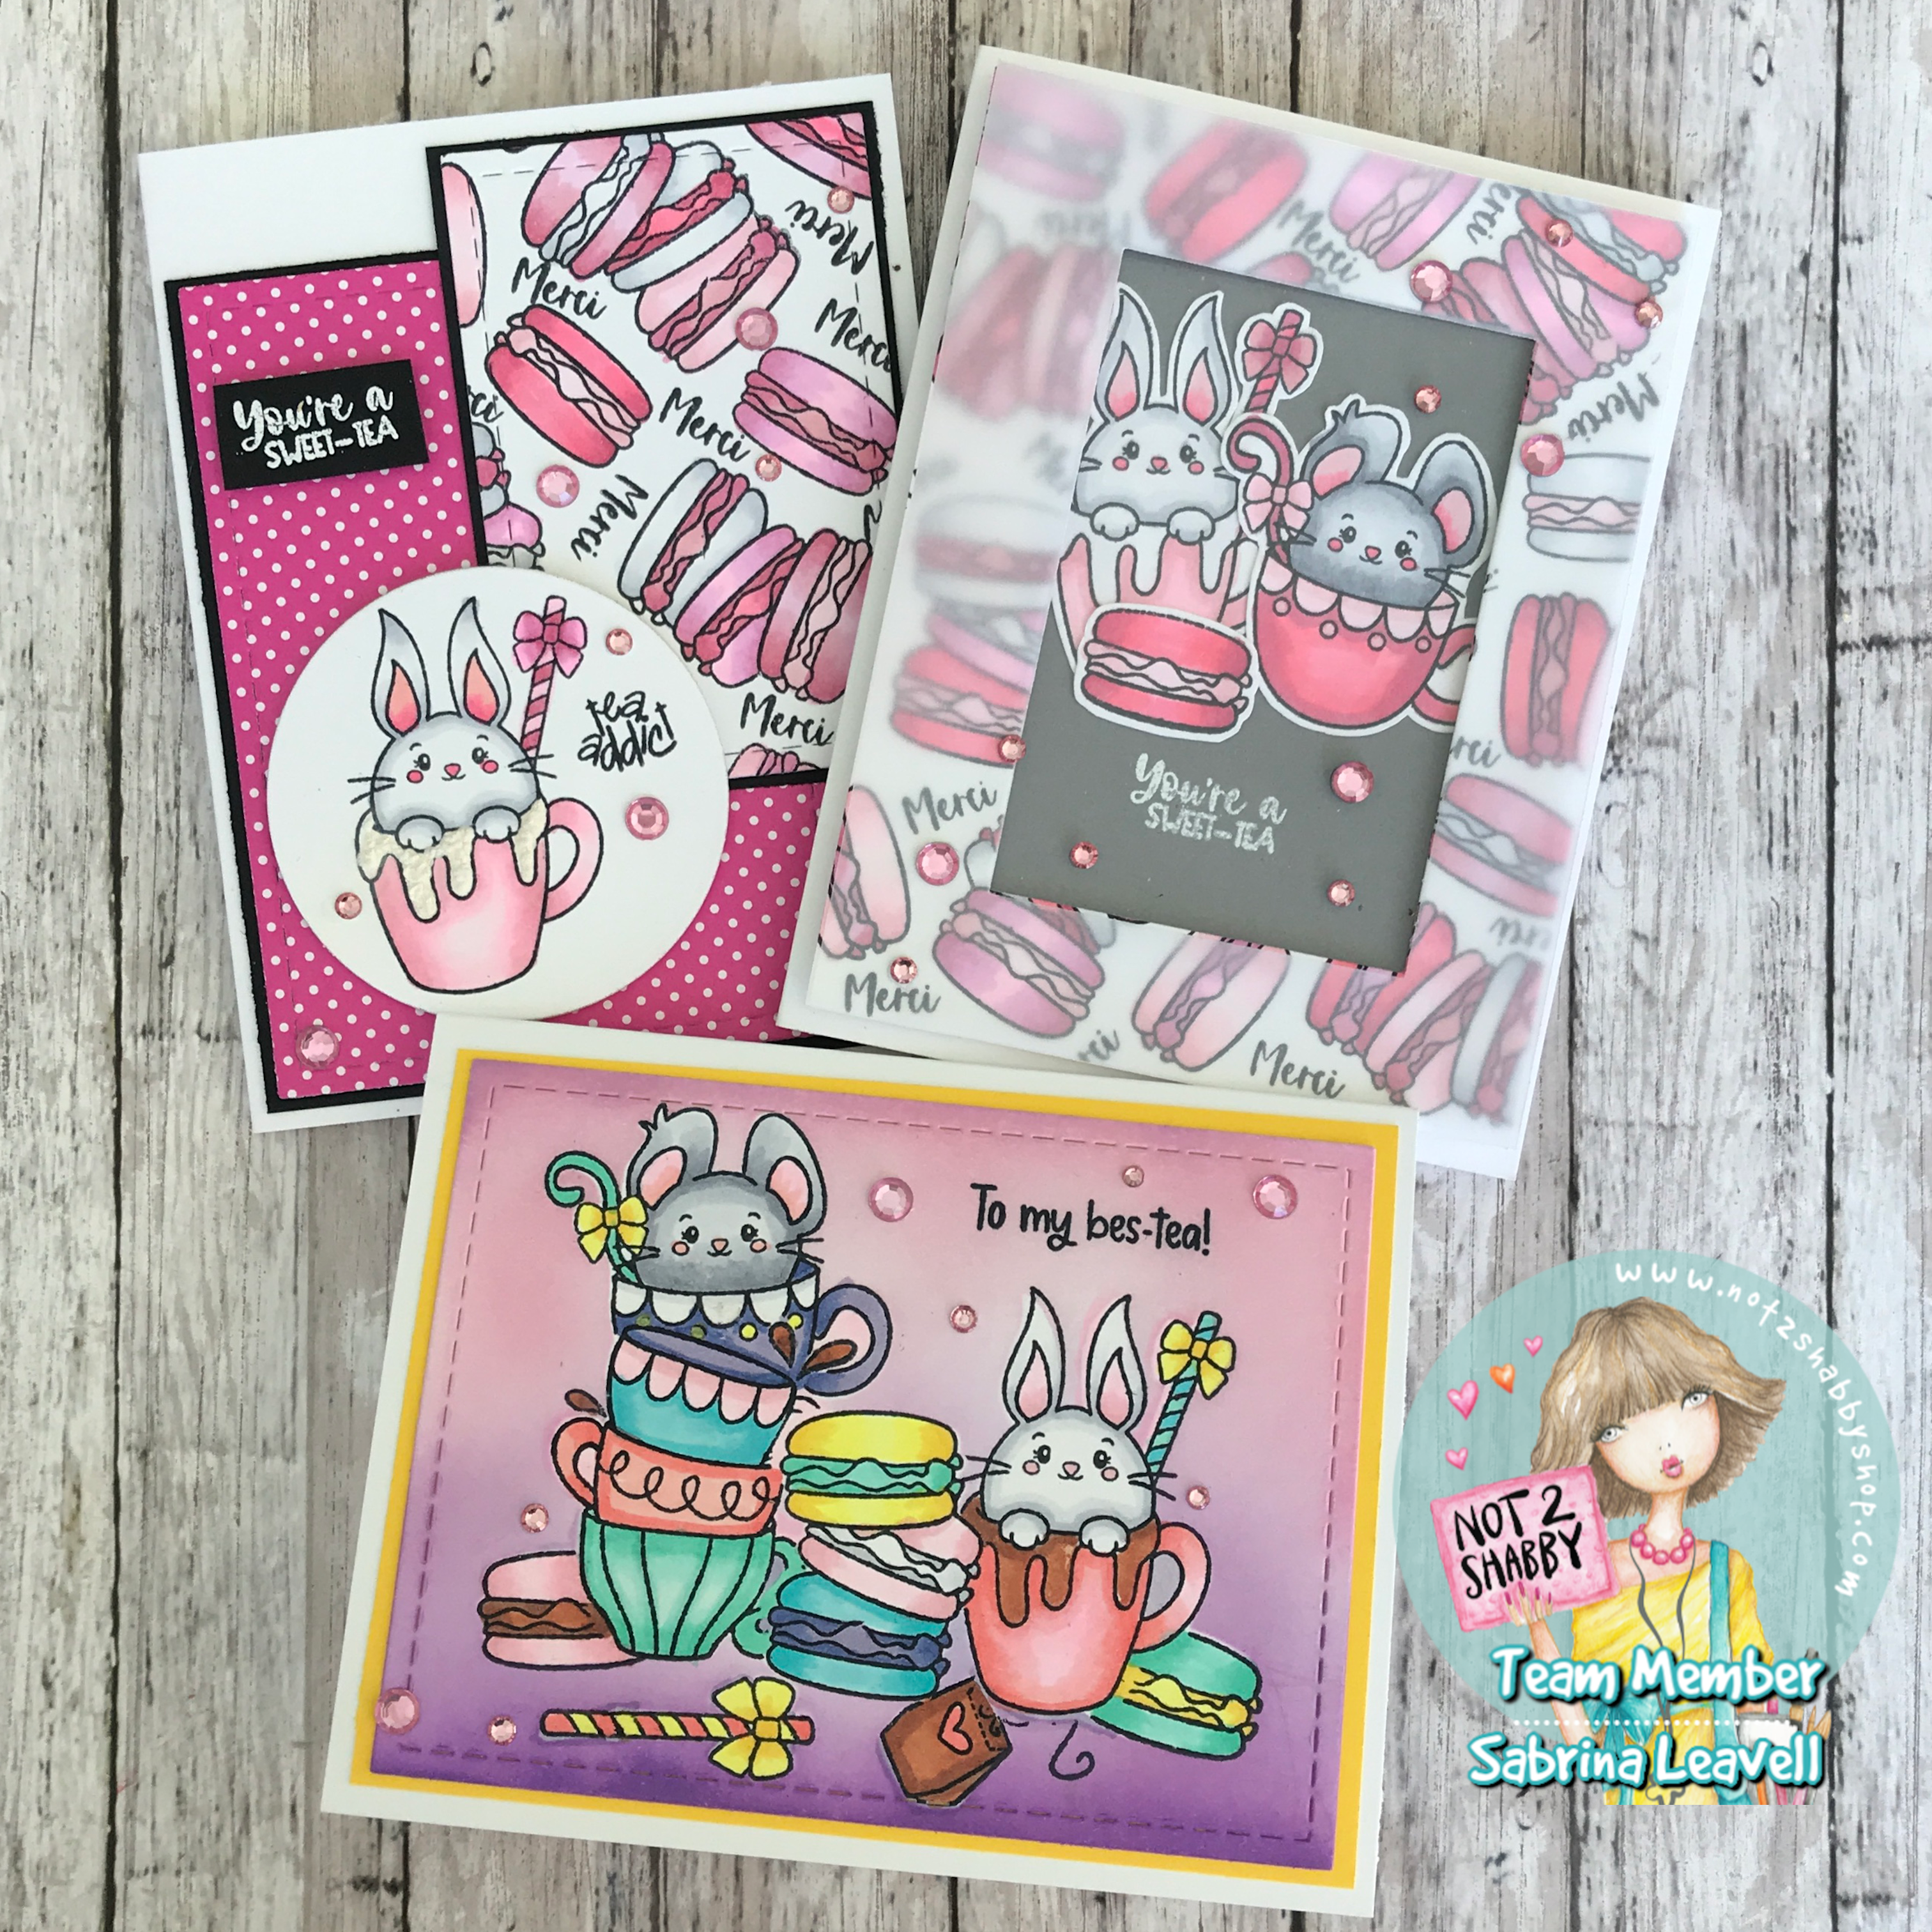 Not 2 Shabby "Tea Time Buddies" | 3 Cards 1 Stamp Set